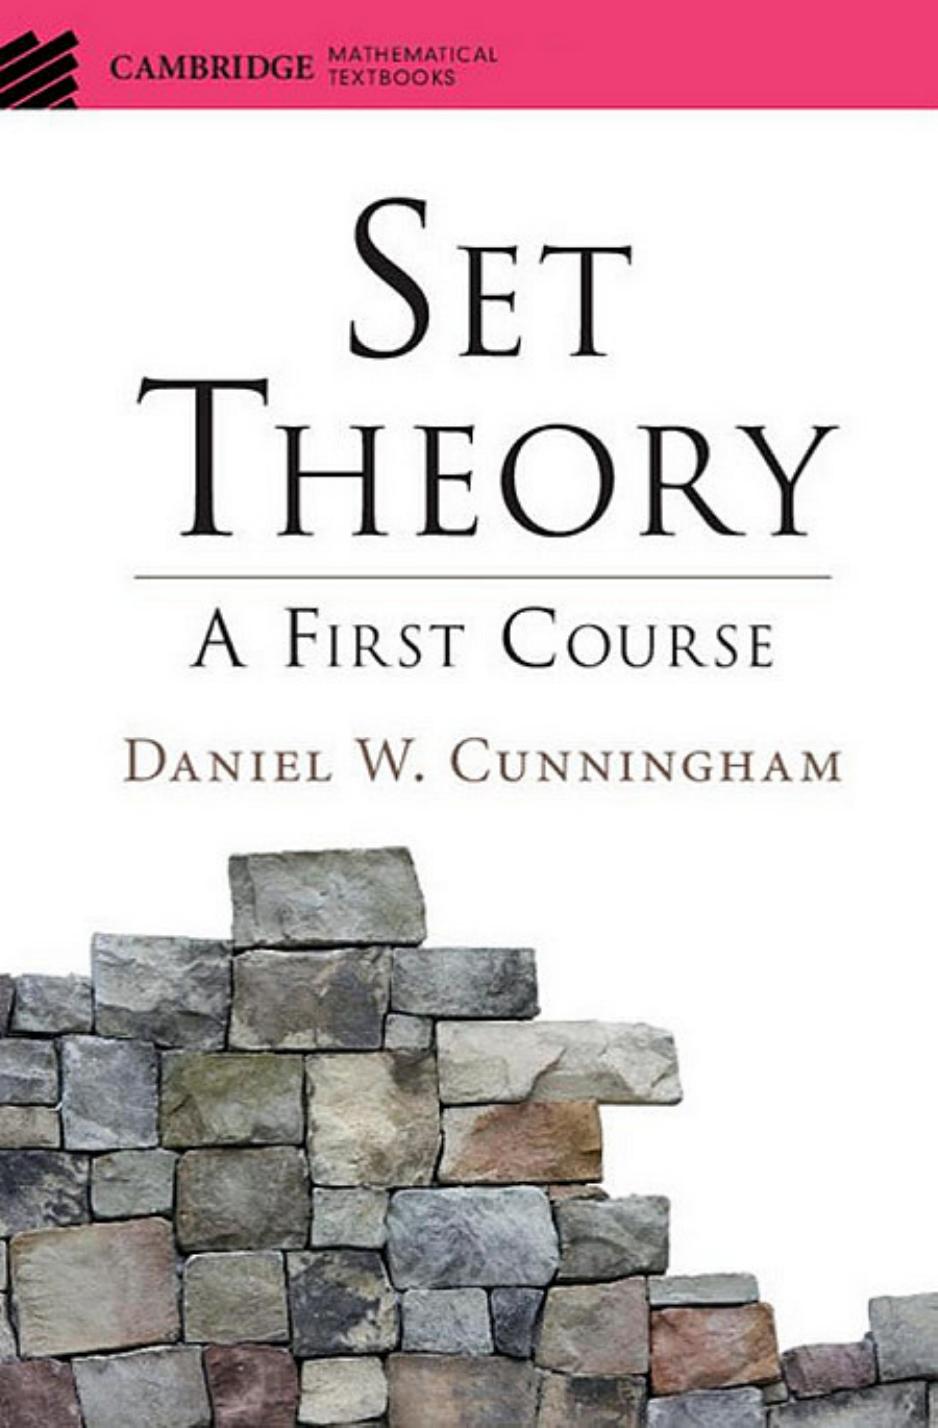 Set Theory: A First Course by Daniel W. Cunningham